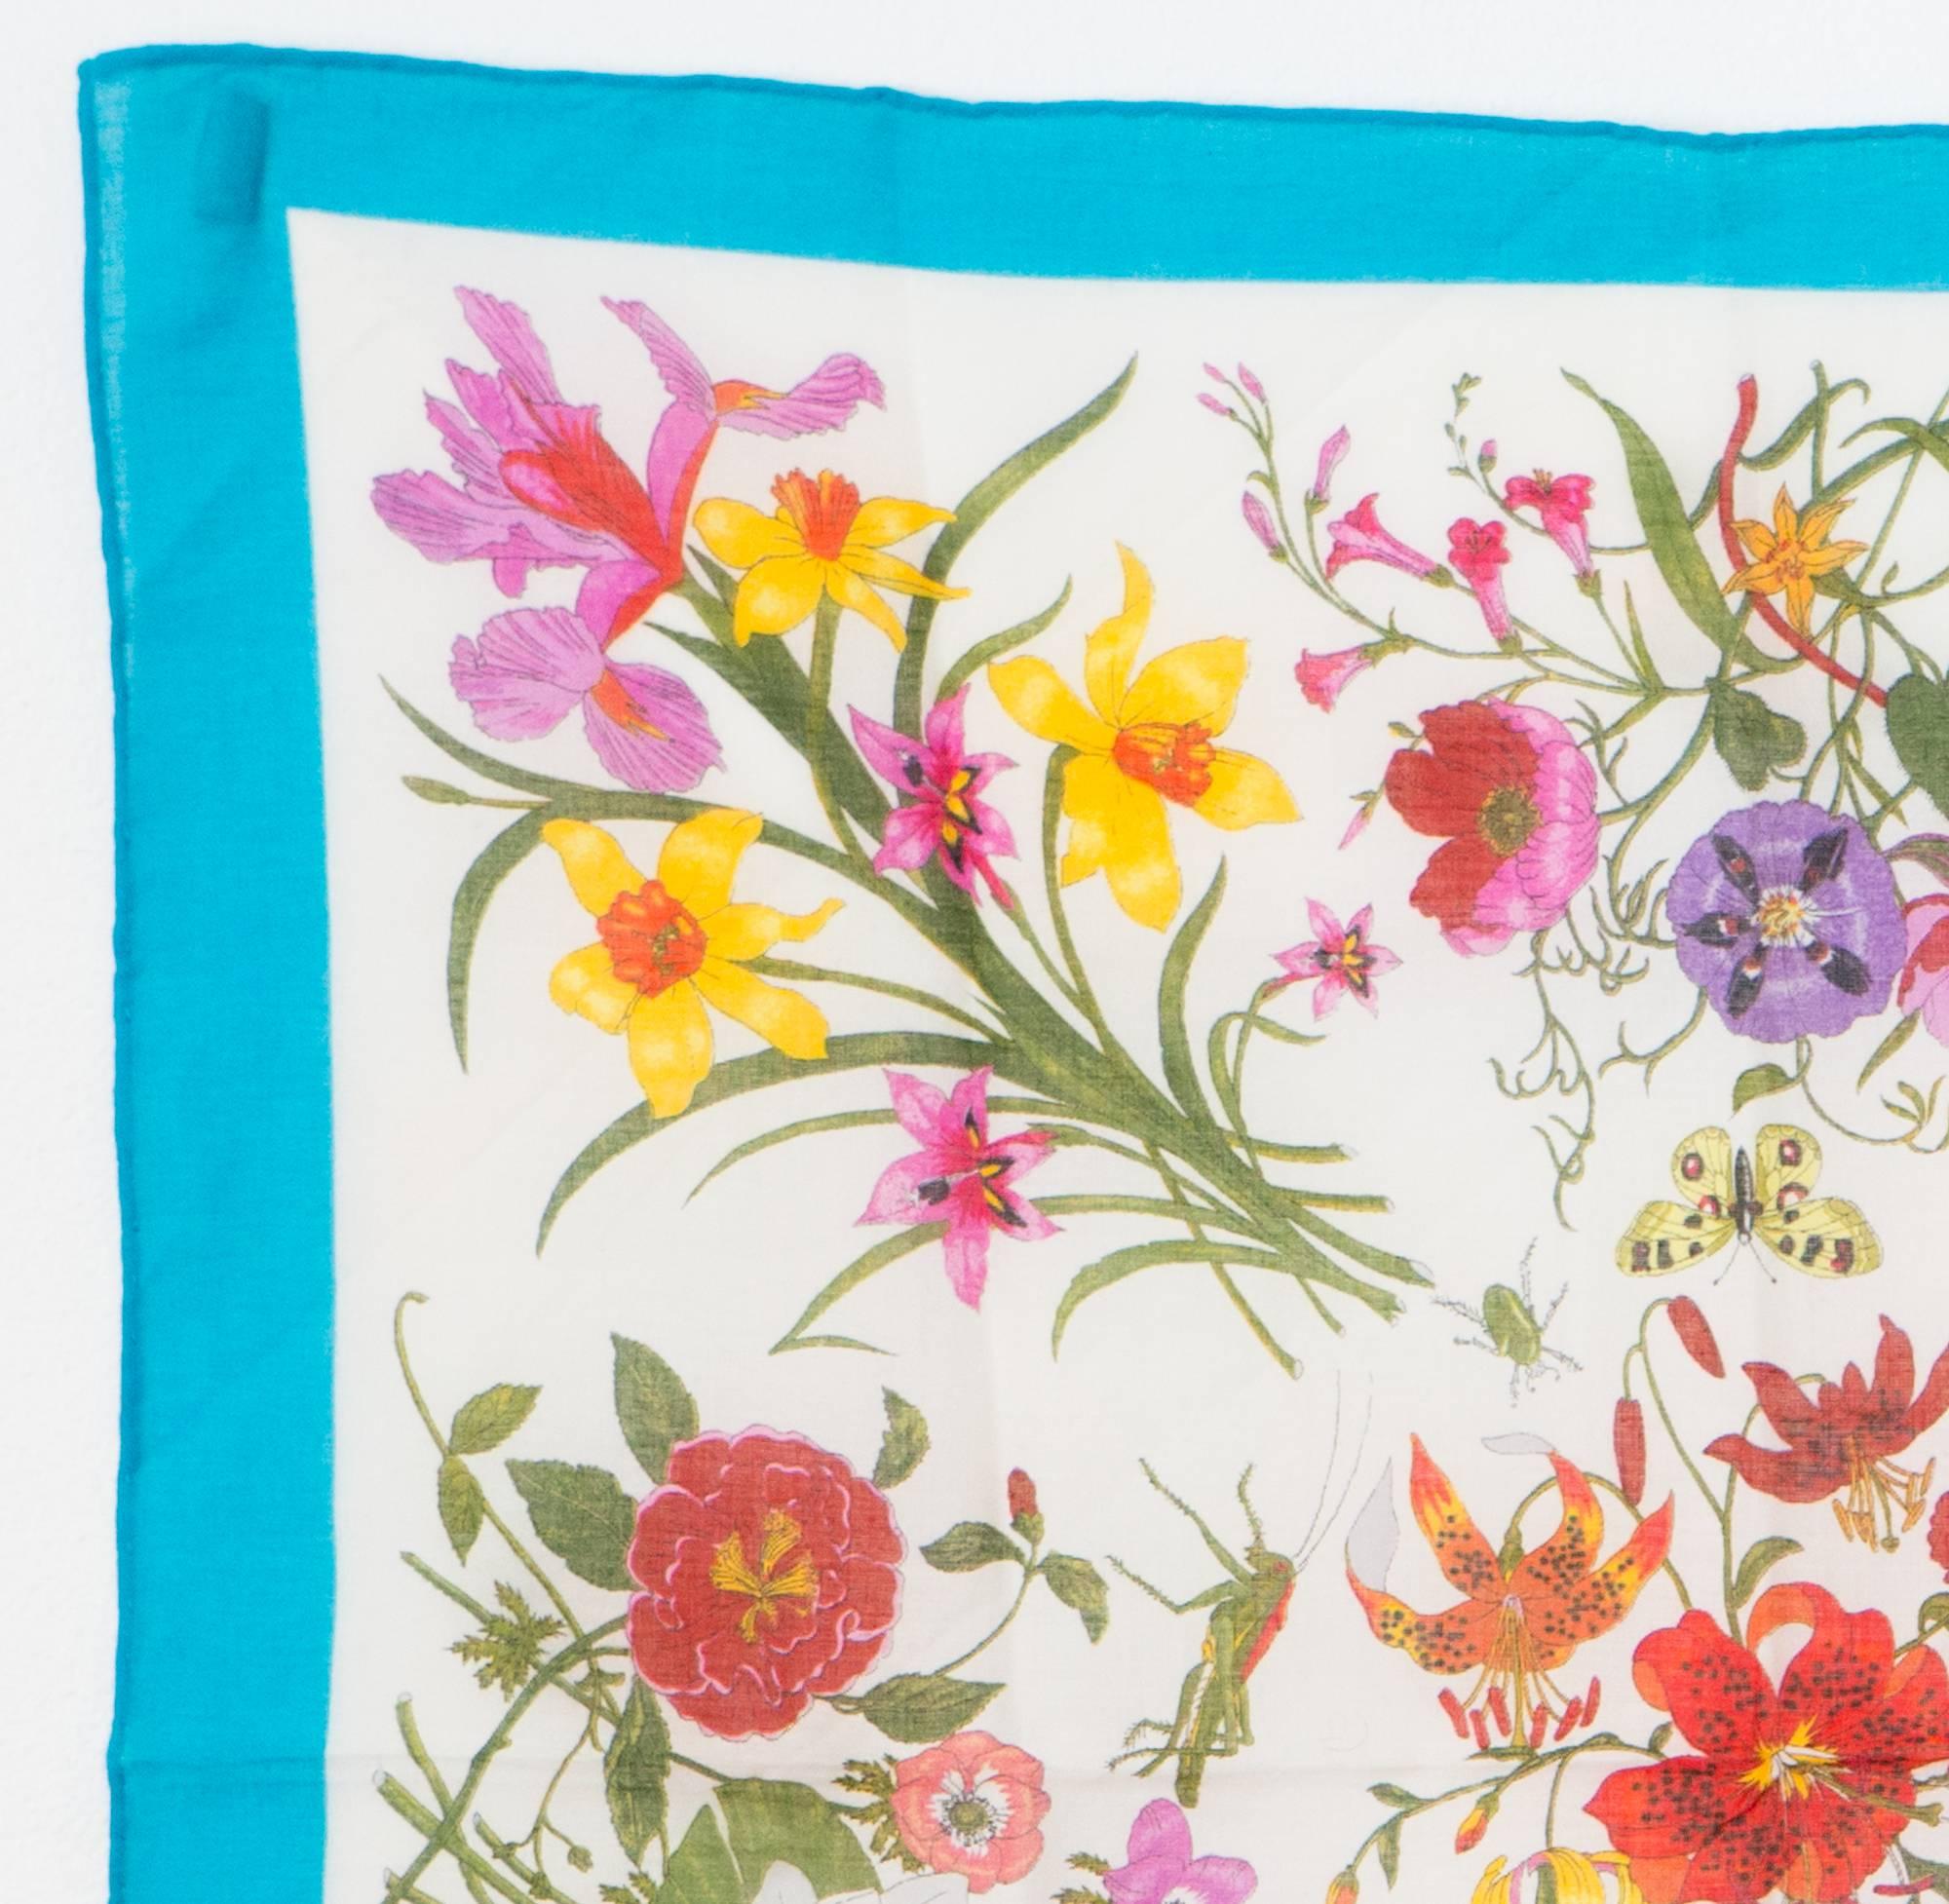 Gucci Flora printed cotton scarf featuring the famous and emblematic Accornero floral print,  turquoise border,  signed 'Gucci' and 'V. Accornero' (the artist's name) in the print.
In excellent vintage condition. Made in Italy
18,1in. (46cm) X 